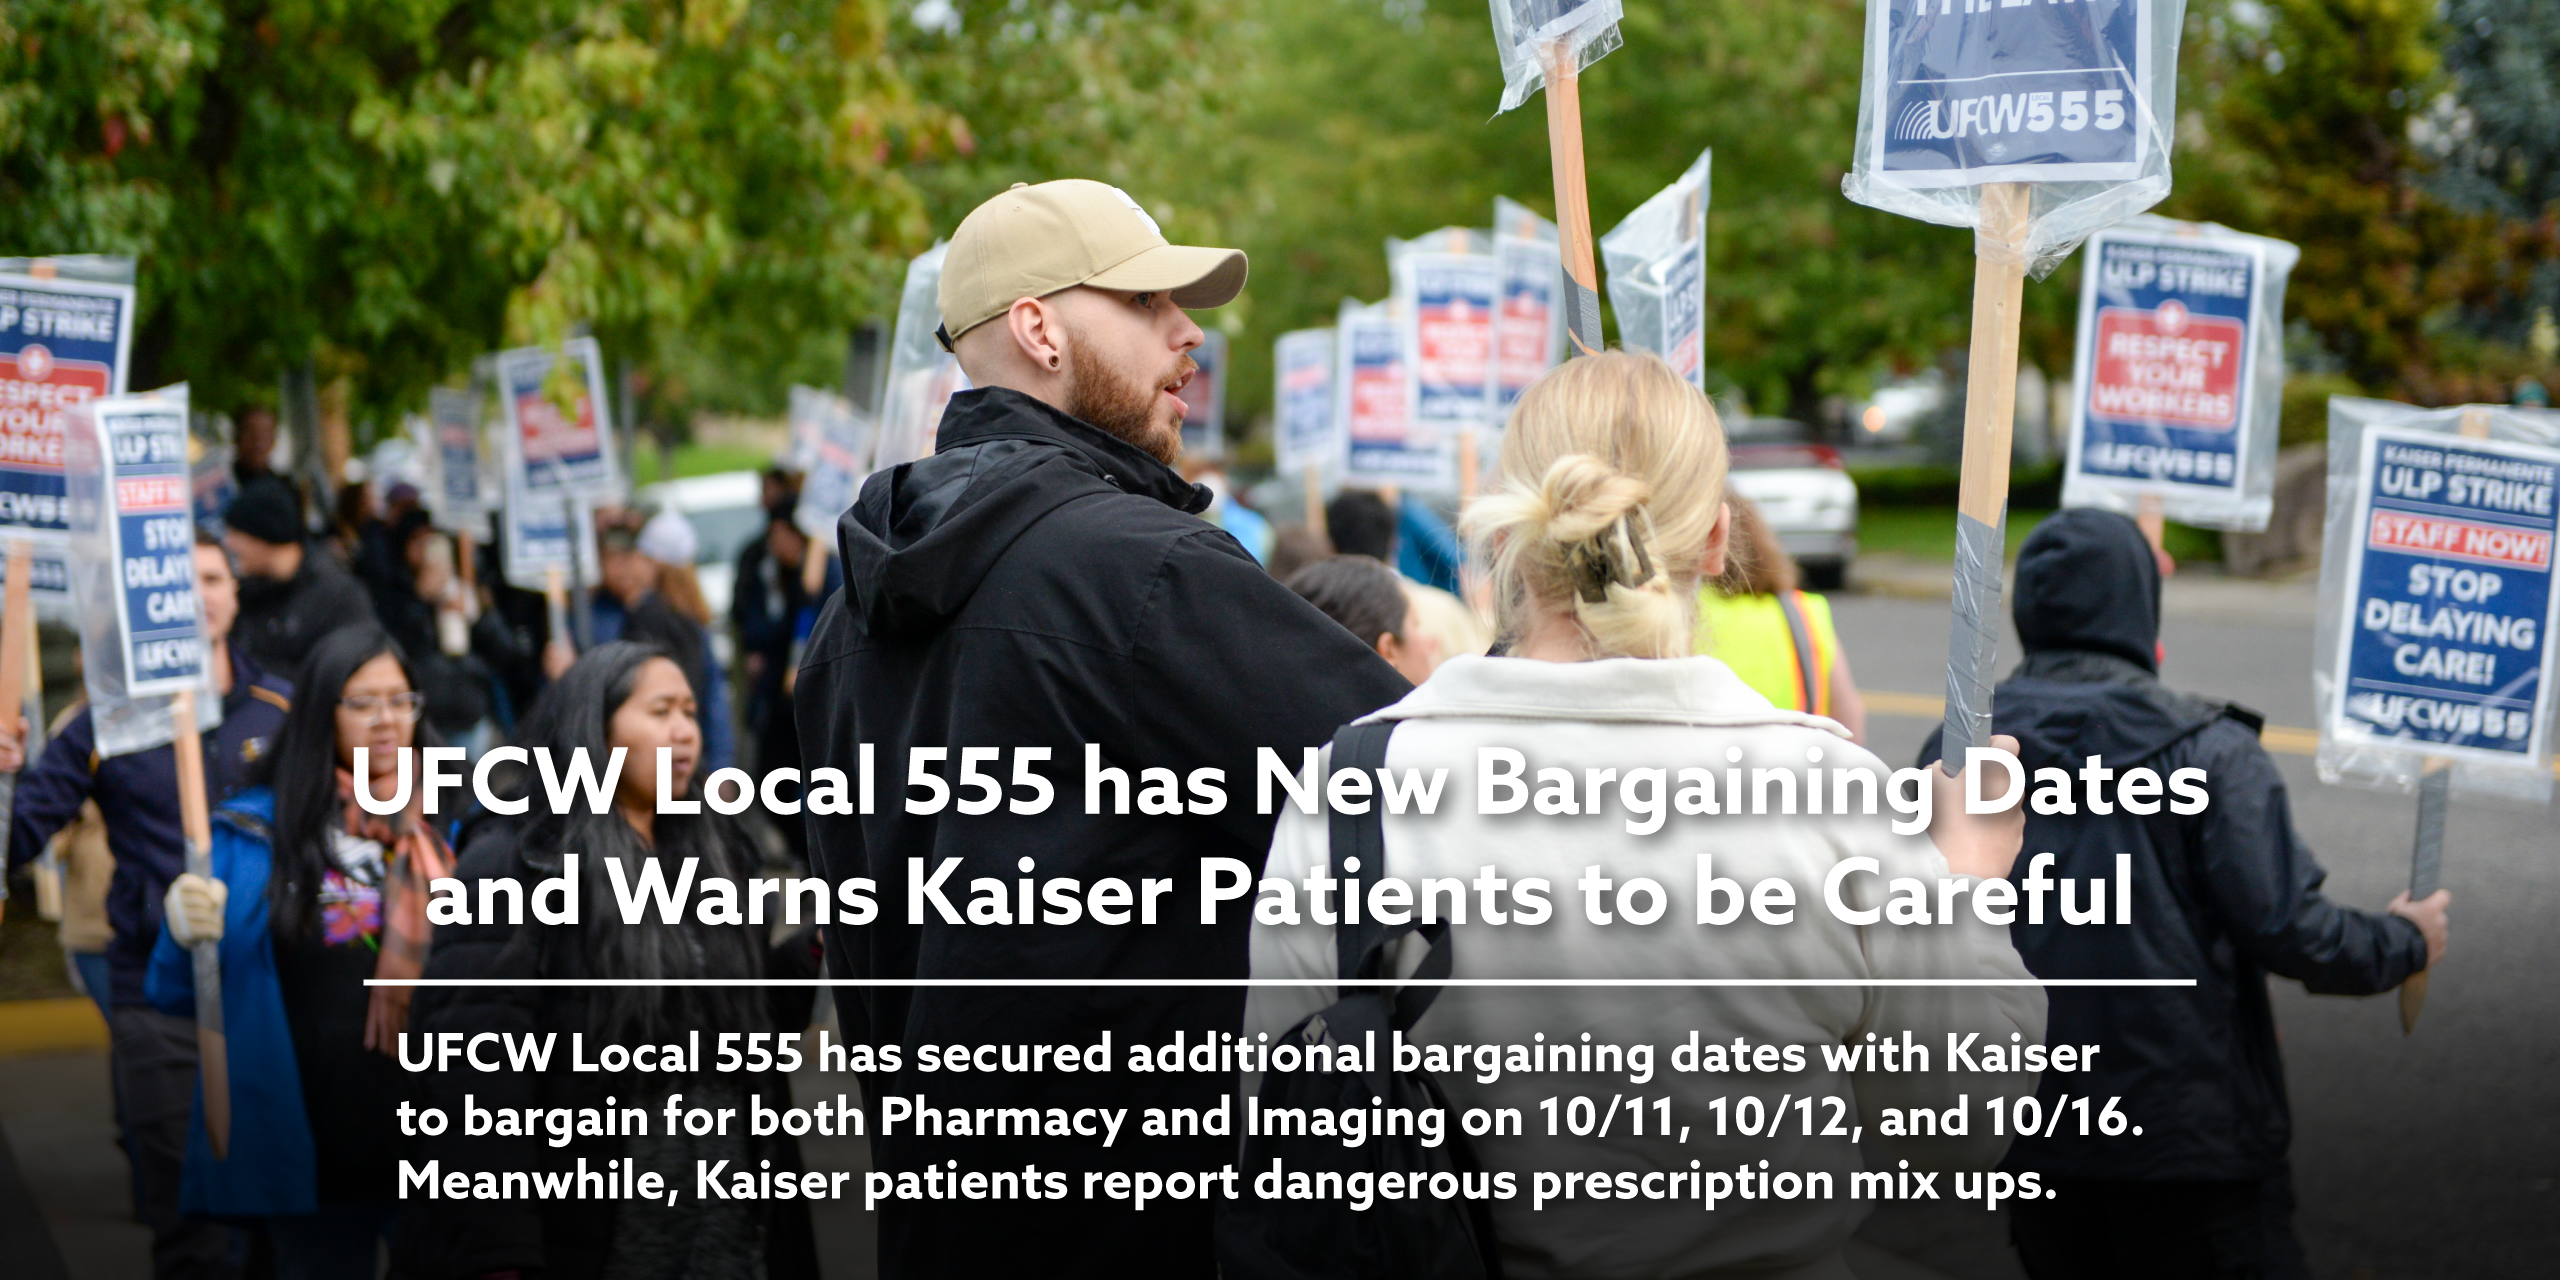 UFCW Local 555 has New Bargaining Dates and Warns Kaiser Patients to be Careful. UFCW Local 555 has secured additional bargaining dates with Kaiser to bargain for both Pharmacy and Imaging on 10/11, 10/12, and 10/16. Meanwhile, Kaiser patients report dangerous prescription mix ups.